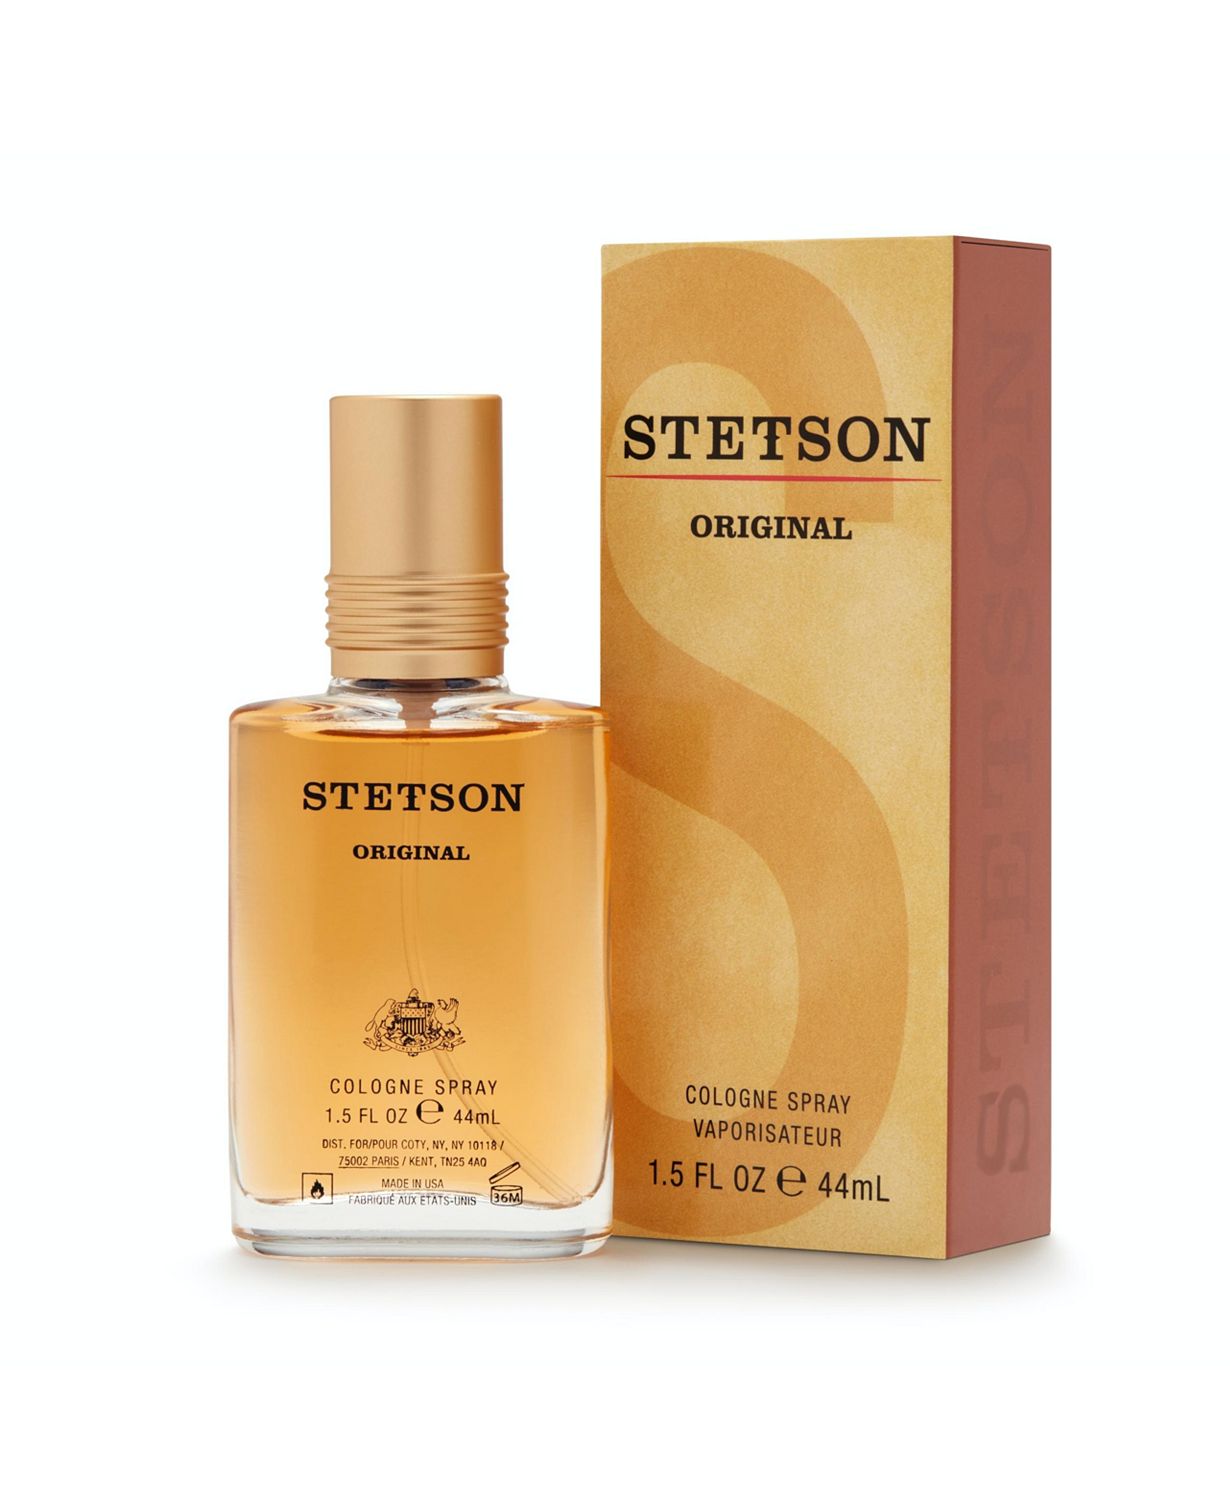 Stetson Original by - Cologne for Men - Classic, Woody and Masculine Aroma with Fragrance Notes of Citrus, Patchouli, and Tonka Bean - 1.5 Fl Oz